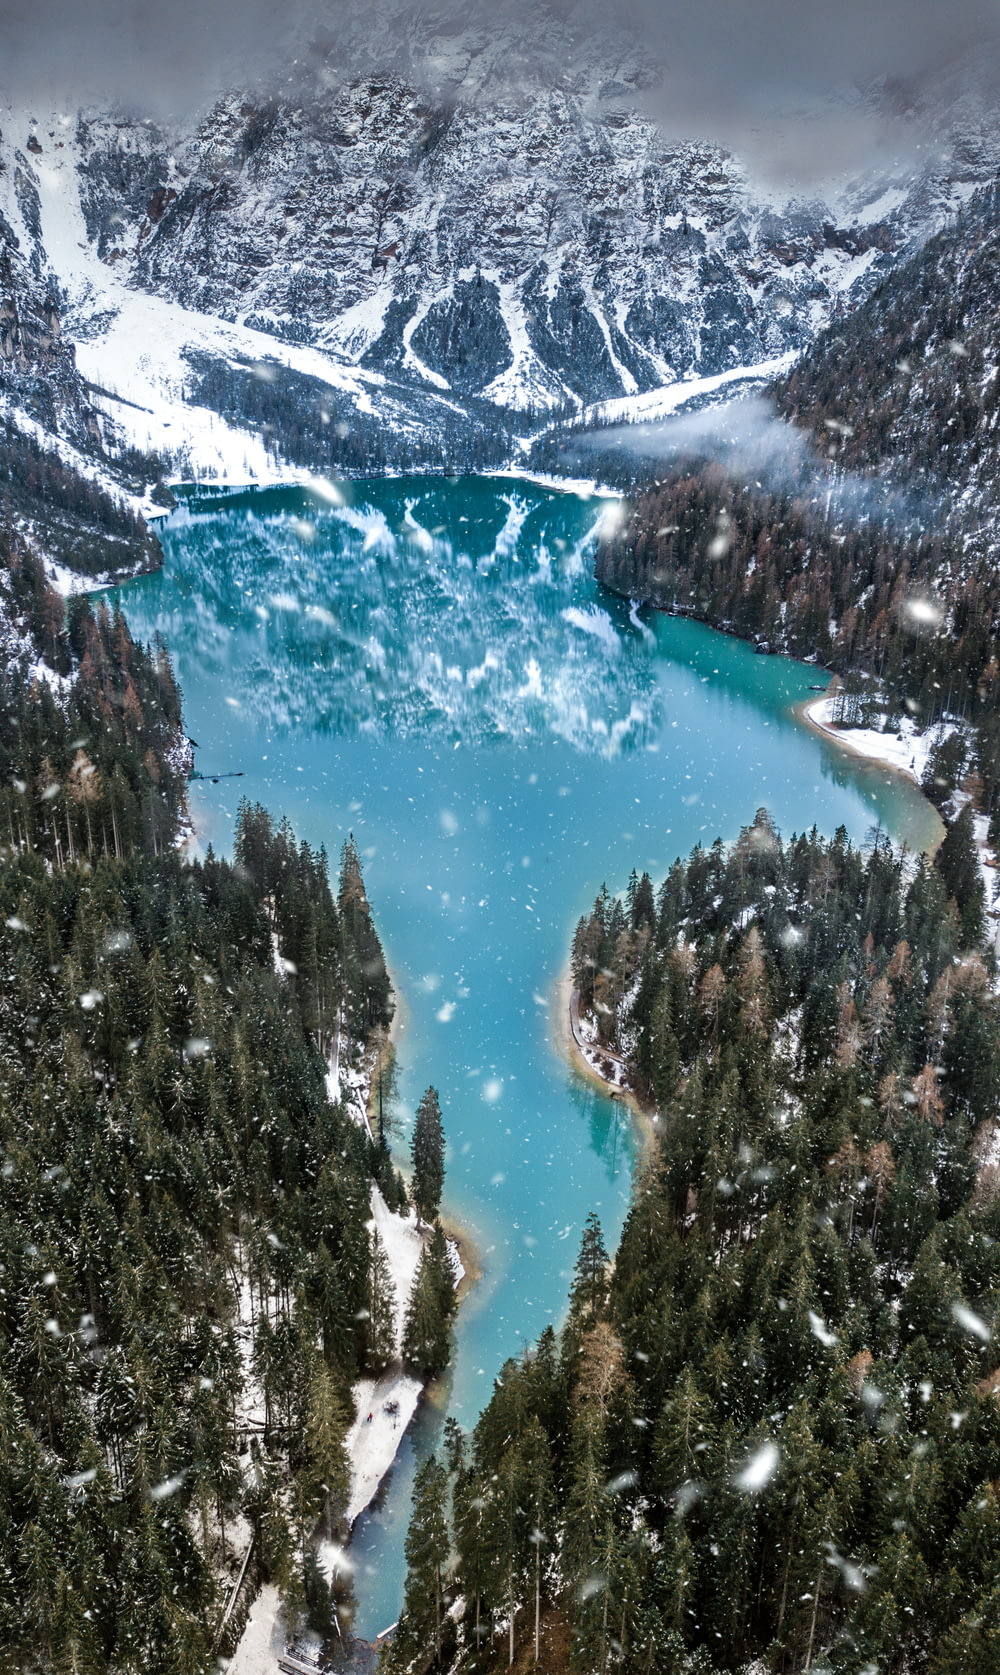 aerial photo of snow covered mountain near body of water